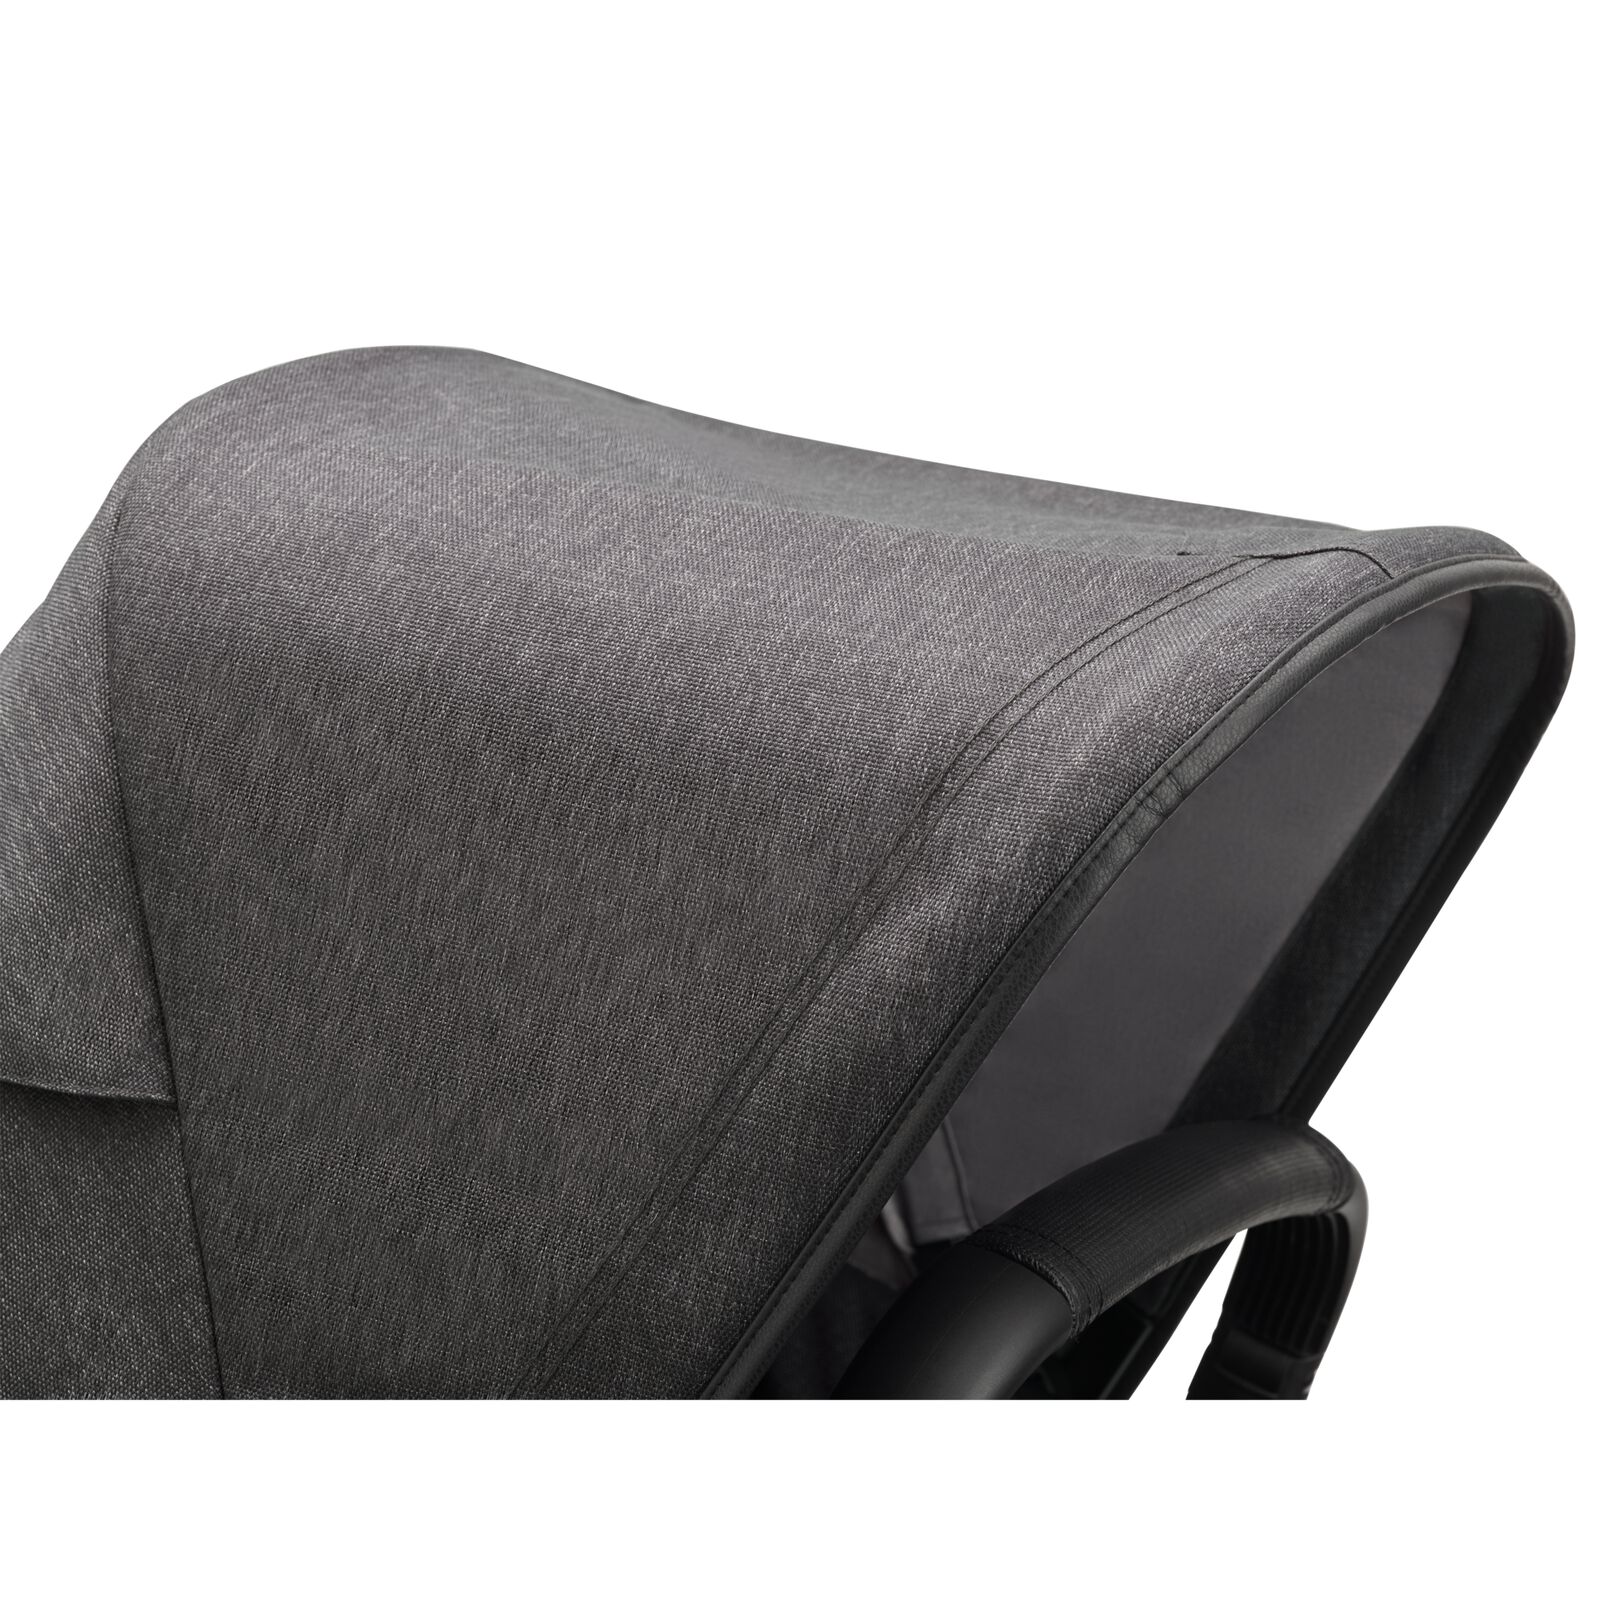 PP Bugaboo Fox 3 Mineral complete US BLACK/WASHED BLACK